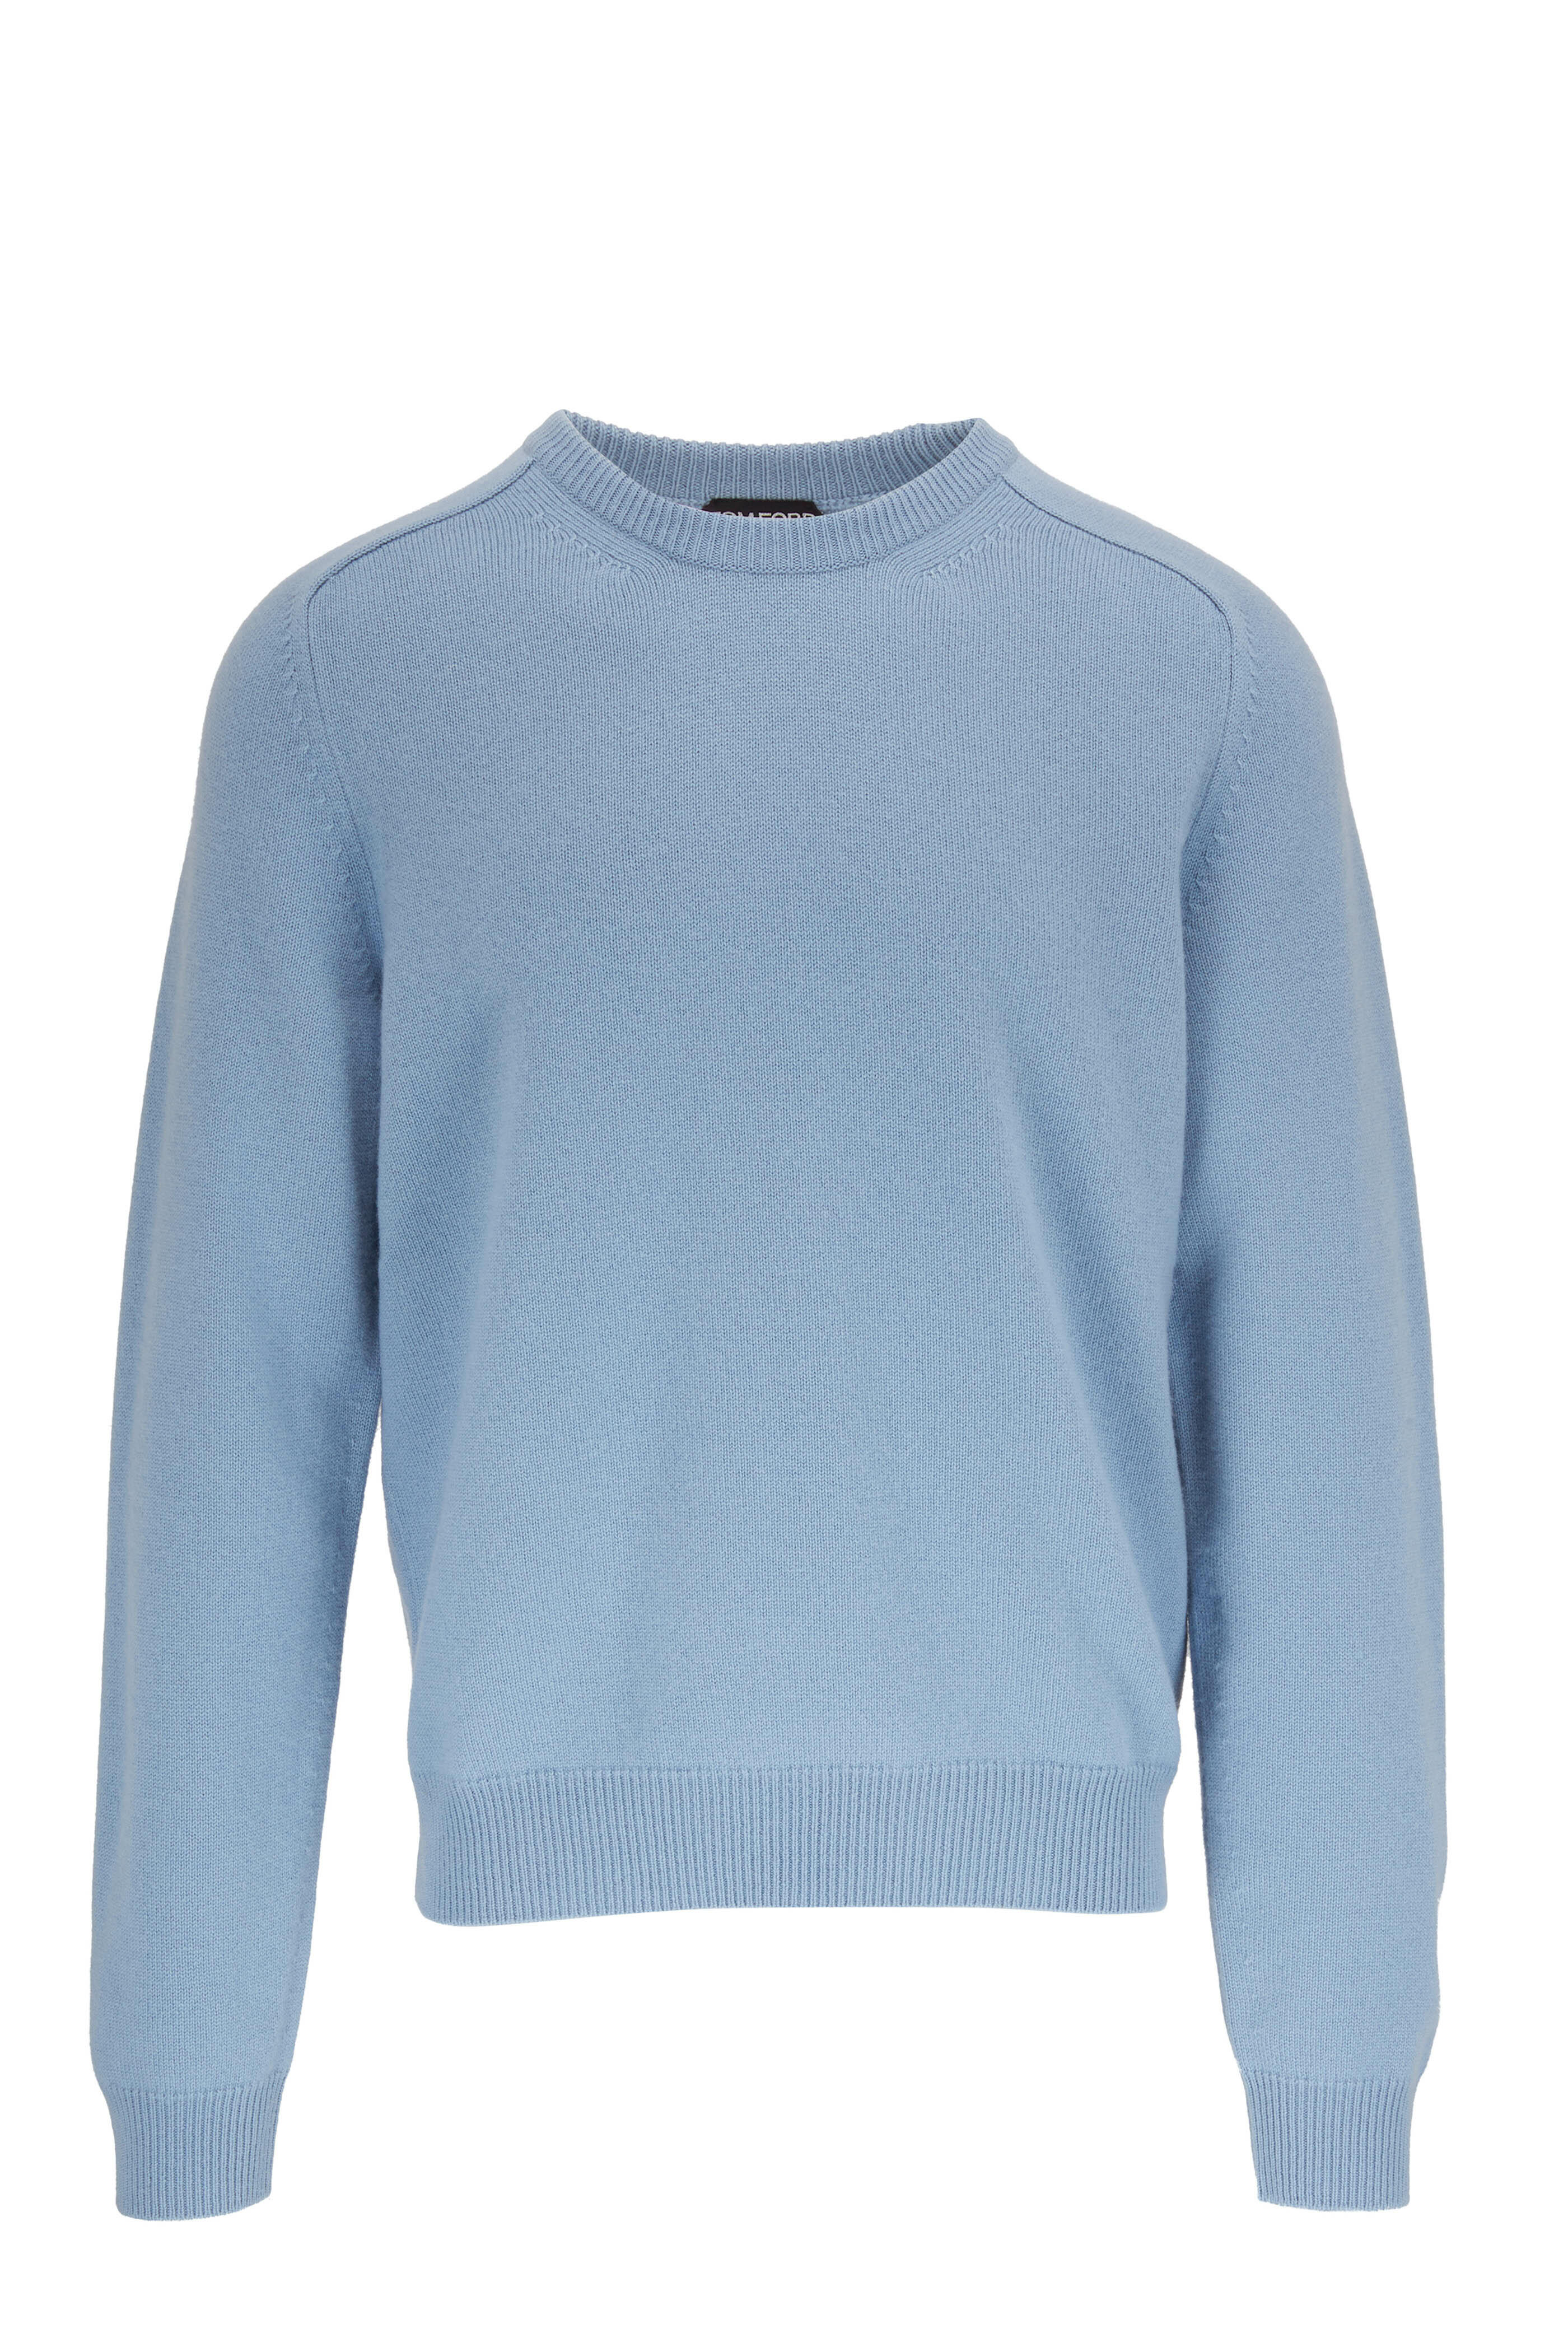 Tom Ford - Light Blue Cashmere Crewneck Sweater | Mitchell Stores